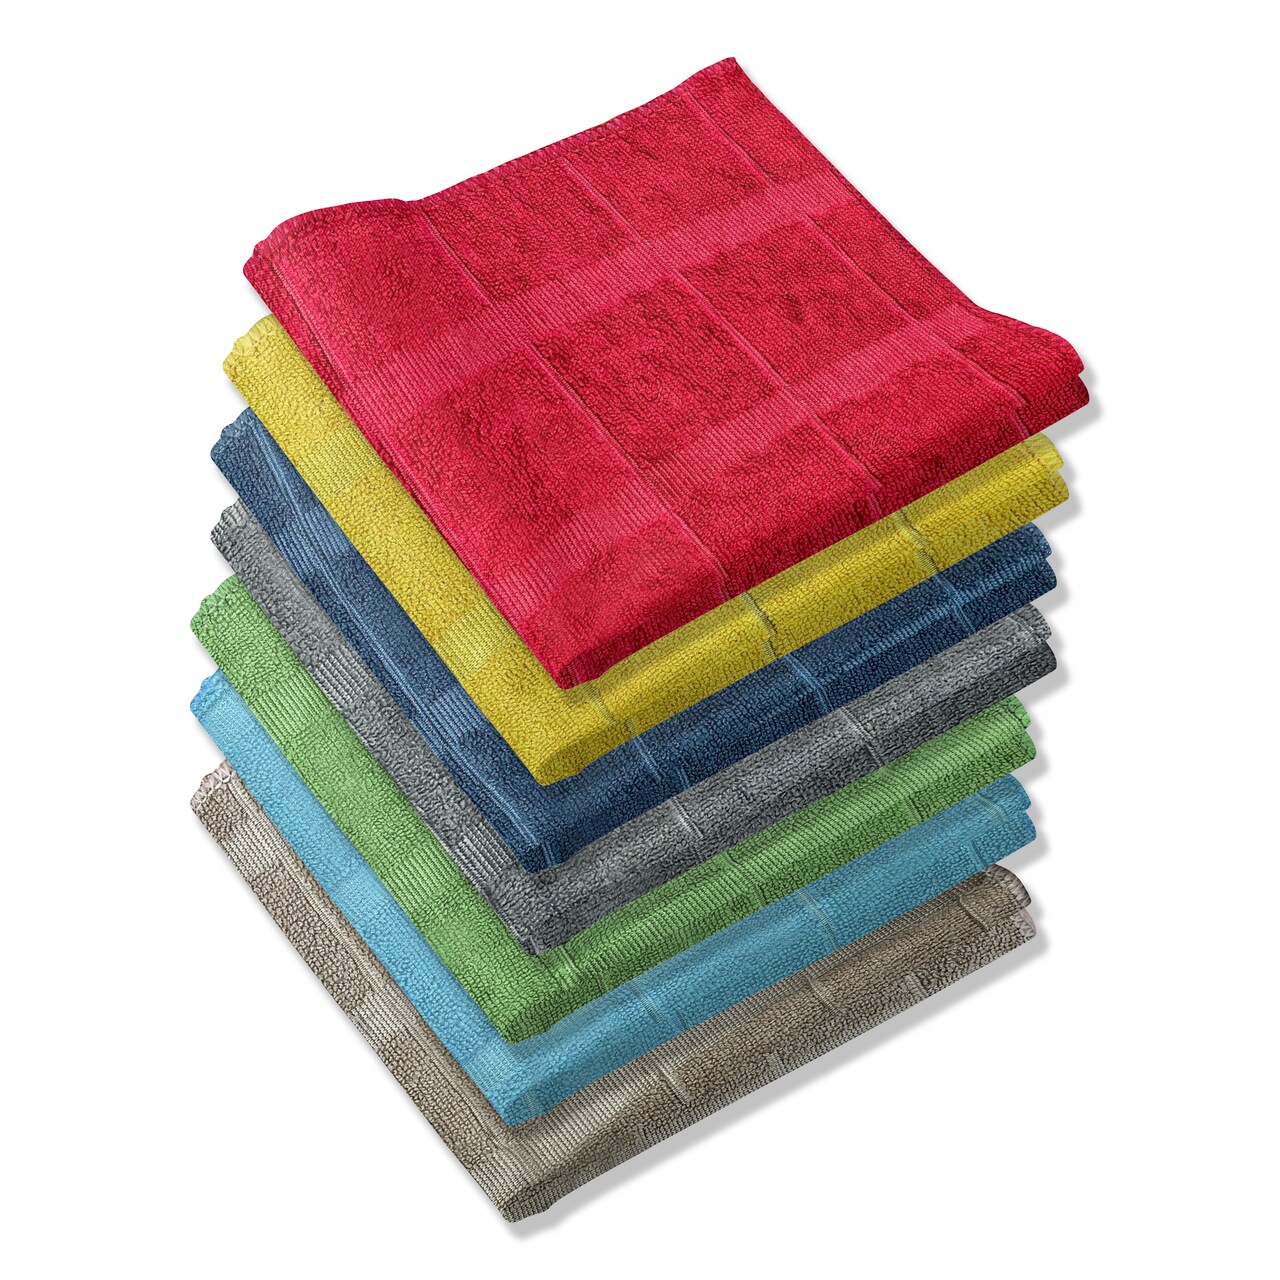 Bargain Hunters 12-Pack Absorbent and Super Soft Microfiber Dish Cloths